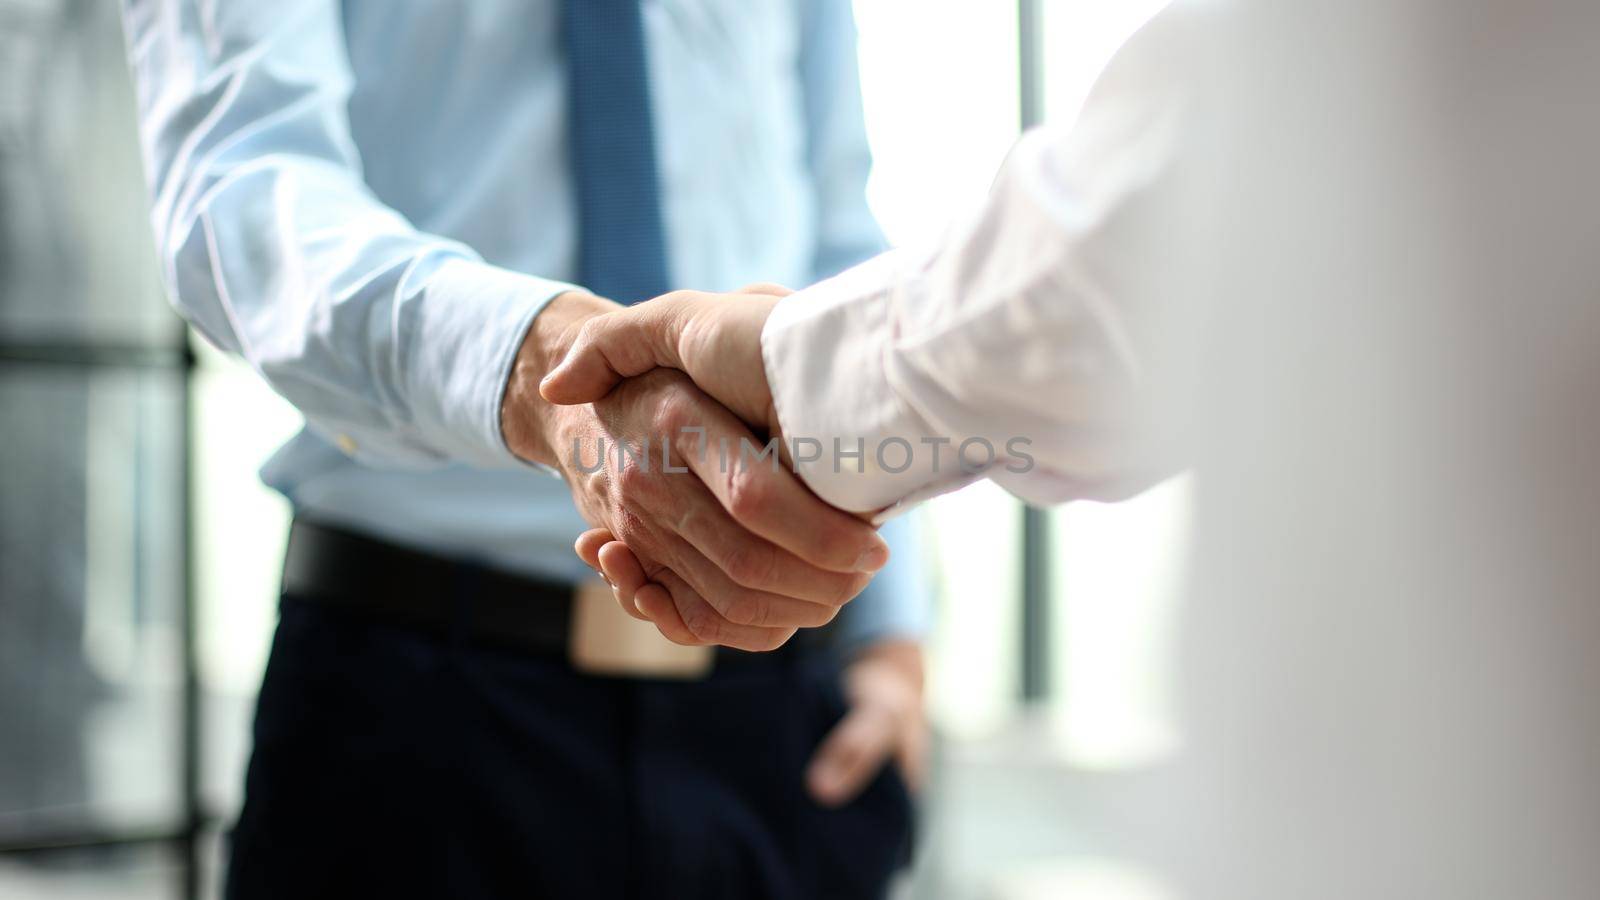 Businessman handshake for teamwork of business merger and acquisition,successful negotiate,hand shake,two businessman shake hand with partner to celebration partnership and business deal concept by Prosto